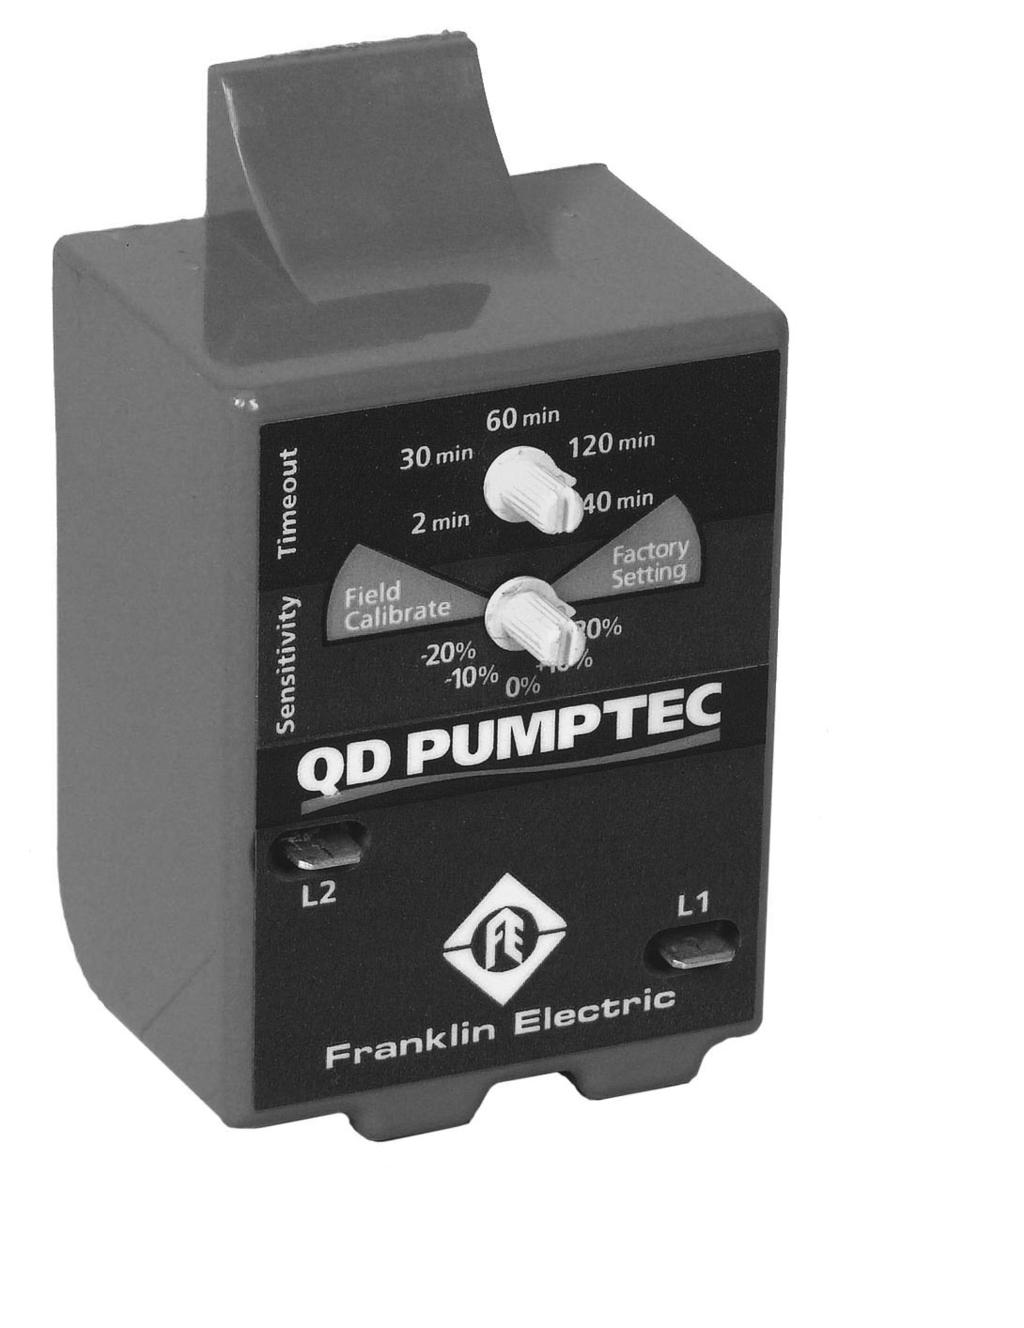 Franklin Electric QD Pumptec The best way to protect a submersible motor and pump Designed and Tested by Franklin Electric for Franklin Electric Accept No Substitutes!